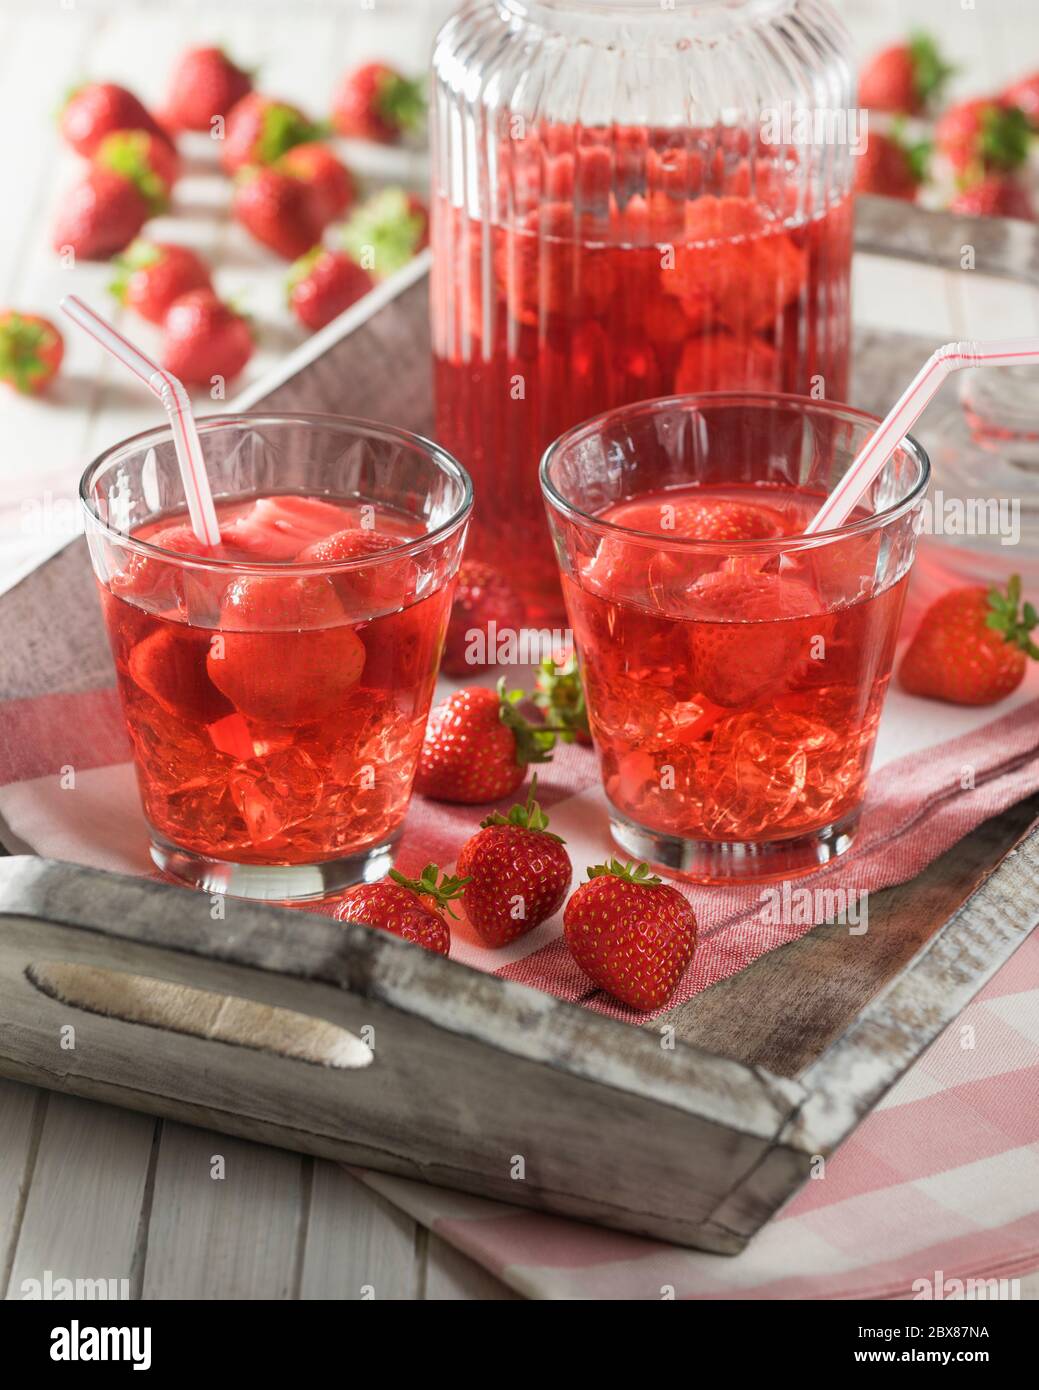 Strawberry kompot. Cold Polish and Central European fruit drink. Stock Photo